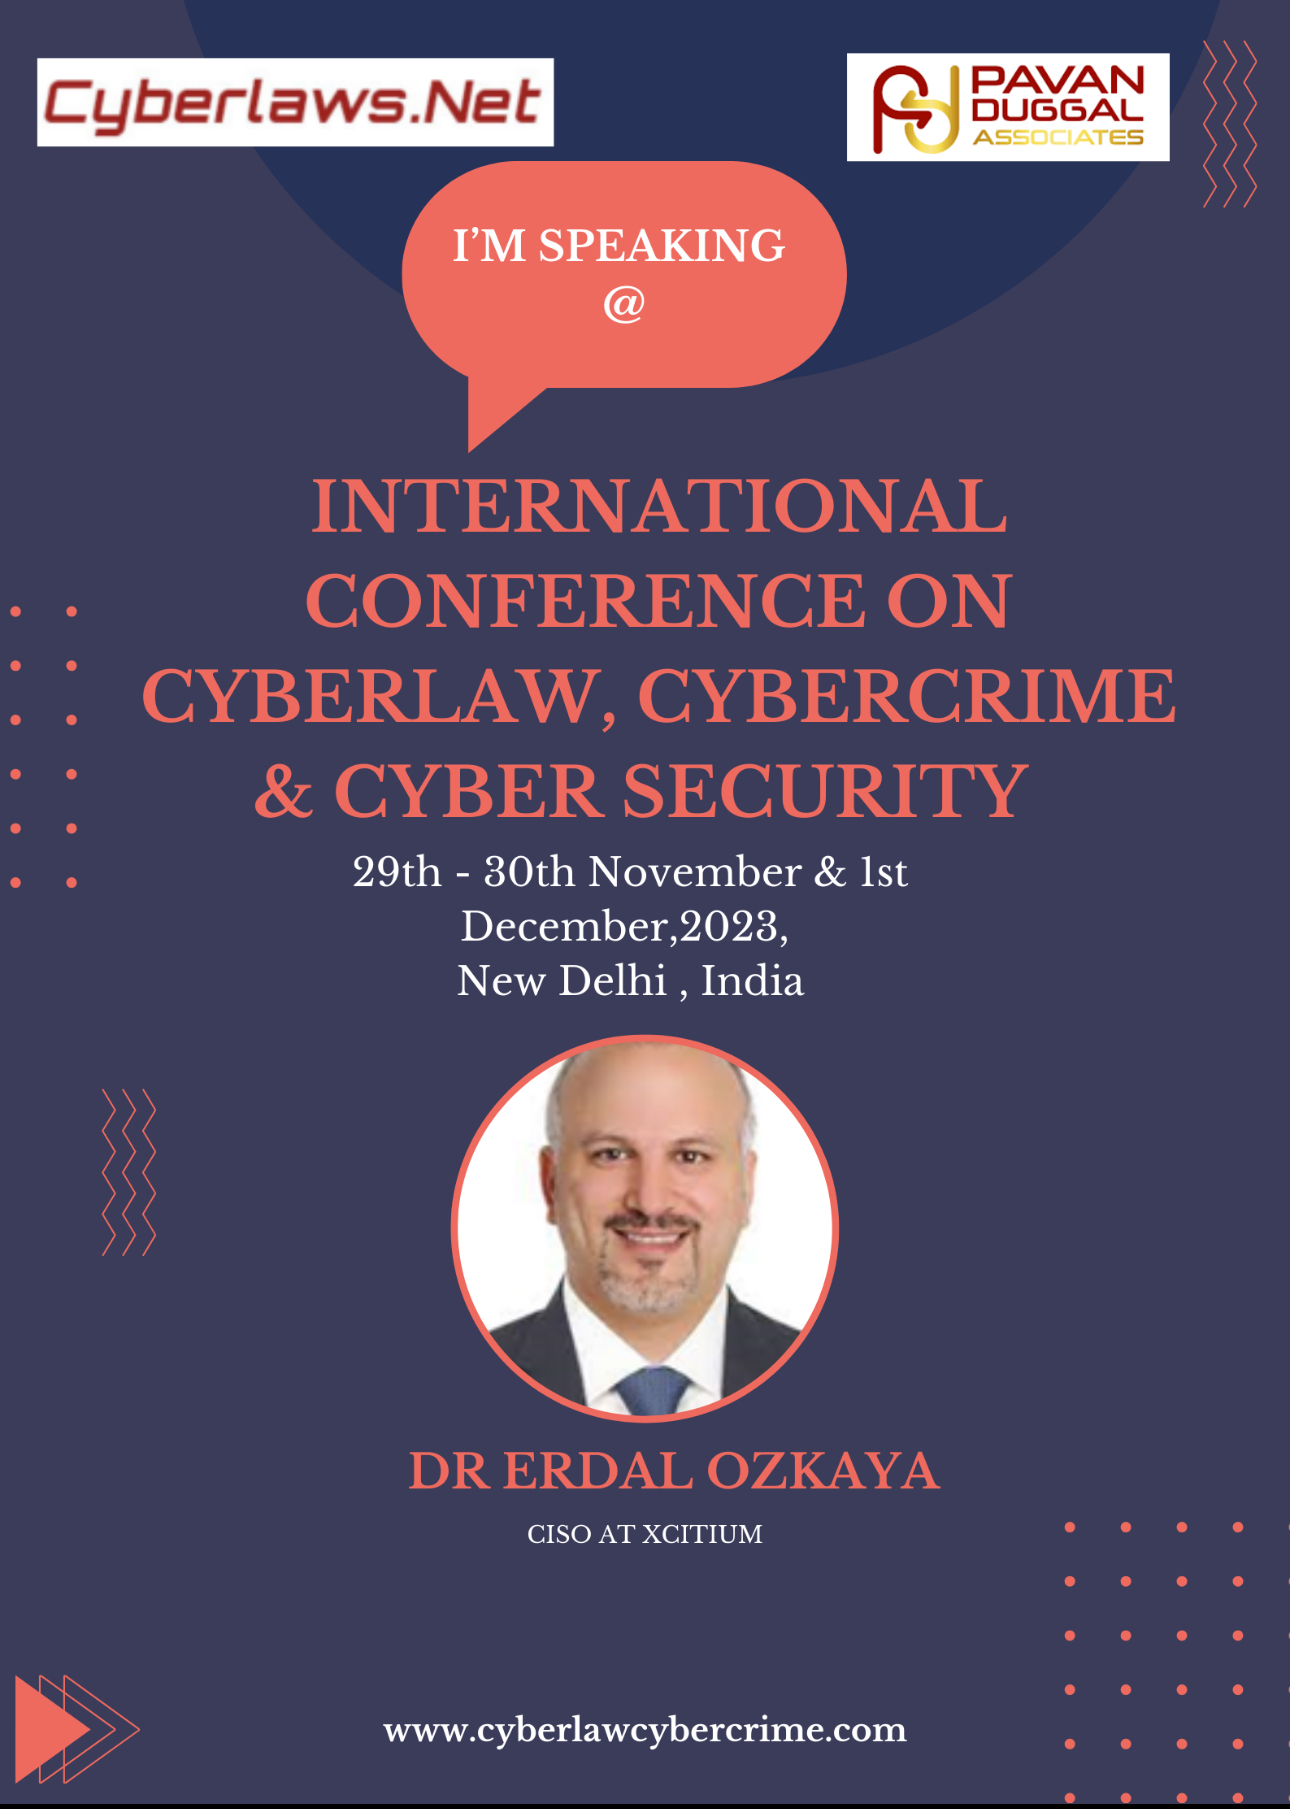 INTERNATIONAL CONFERENCE ON CYBERLAW, CYBERCRIME & CYBERSECURITY 2023